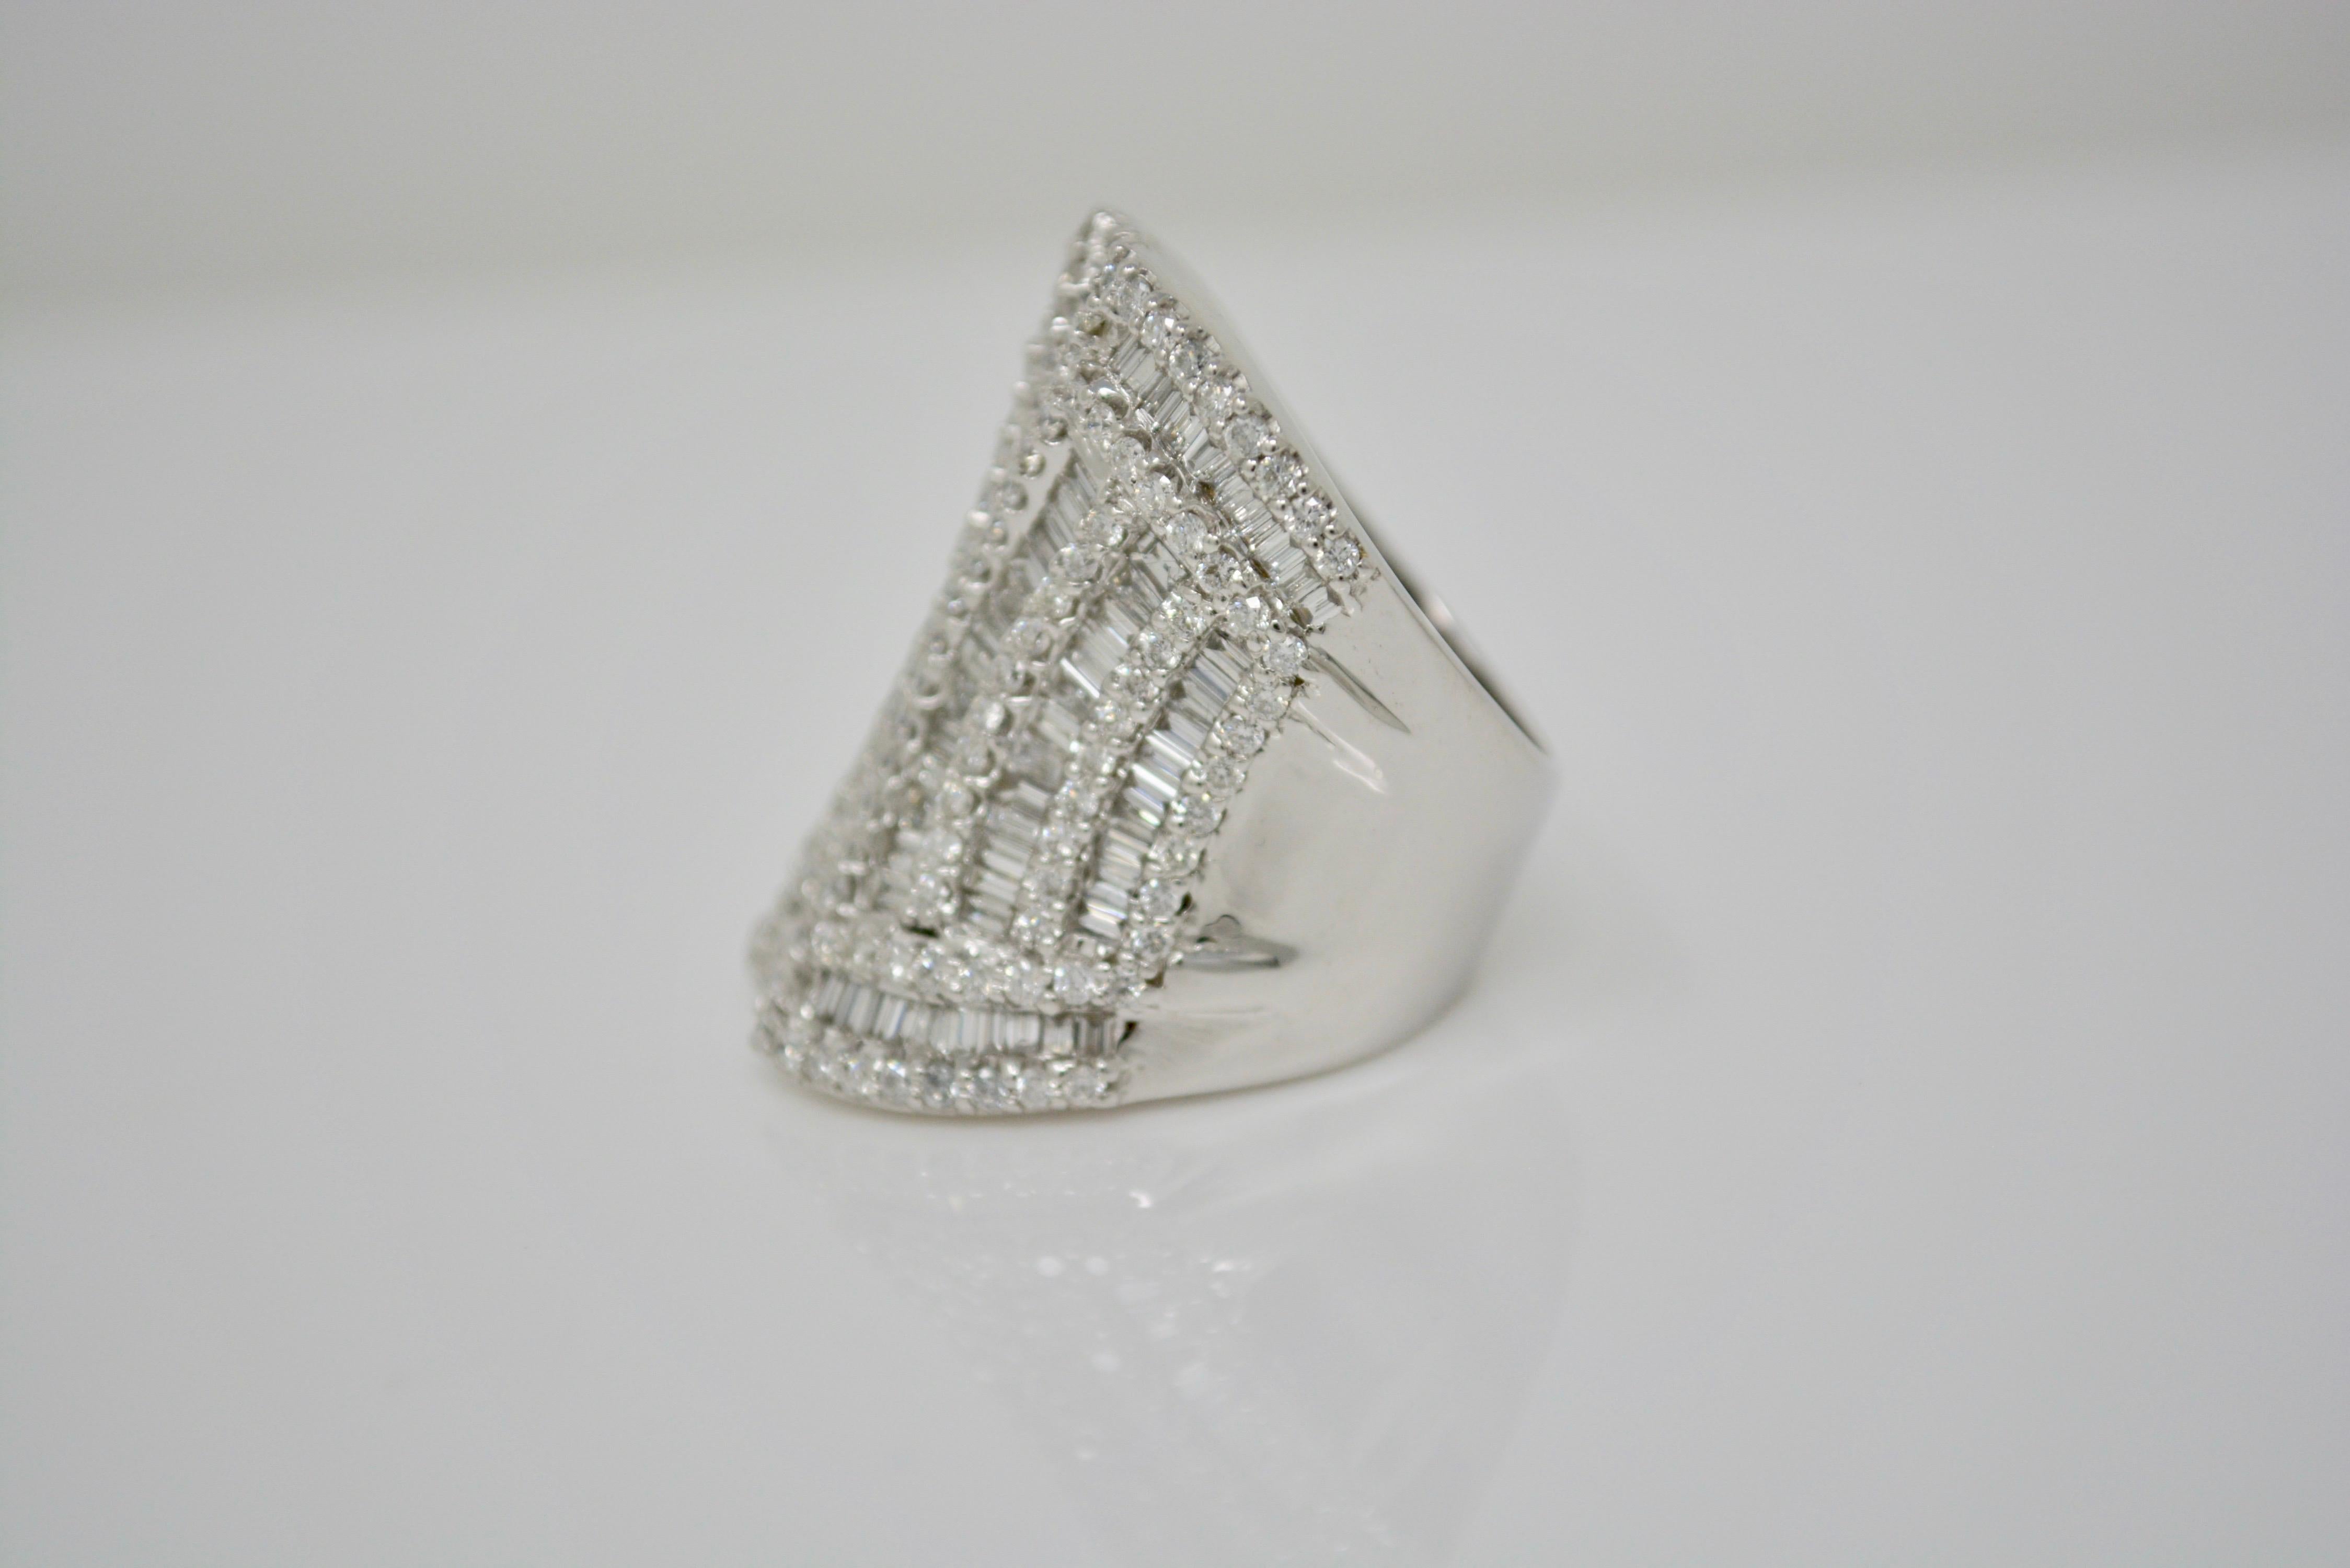 Big , bold and dramatic white diamond cocktail ring ! This spectacular handcrafted ring in 18K white gold features a total of 4.93 carat white round brilliant and baguette diamonds with G-H color and VS clarity . The ring size is 6 1/2. 
Gold weight